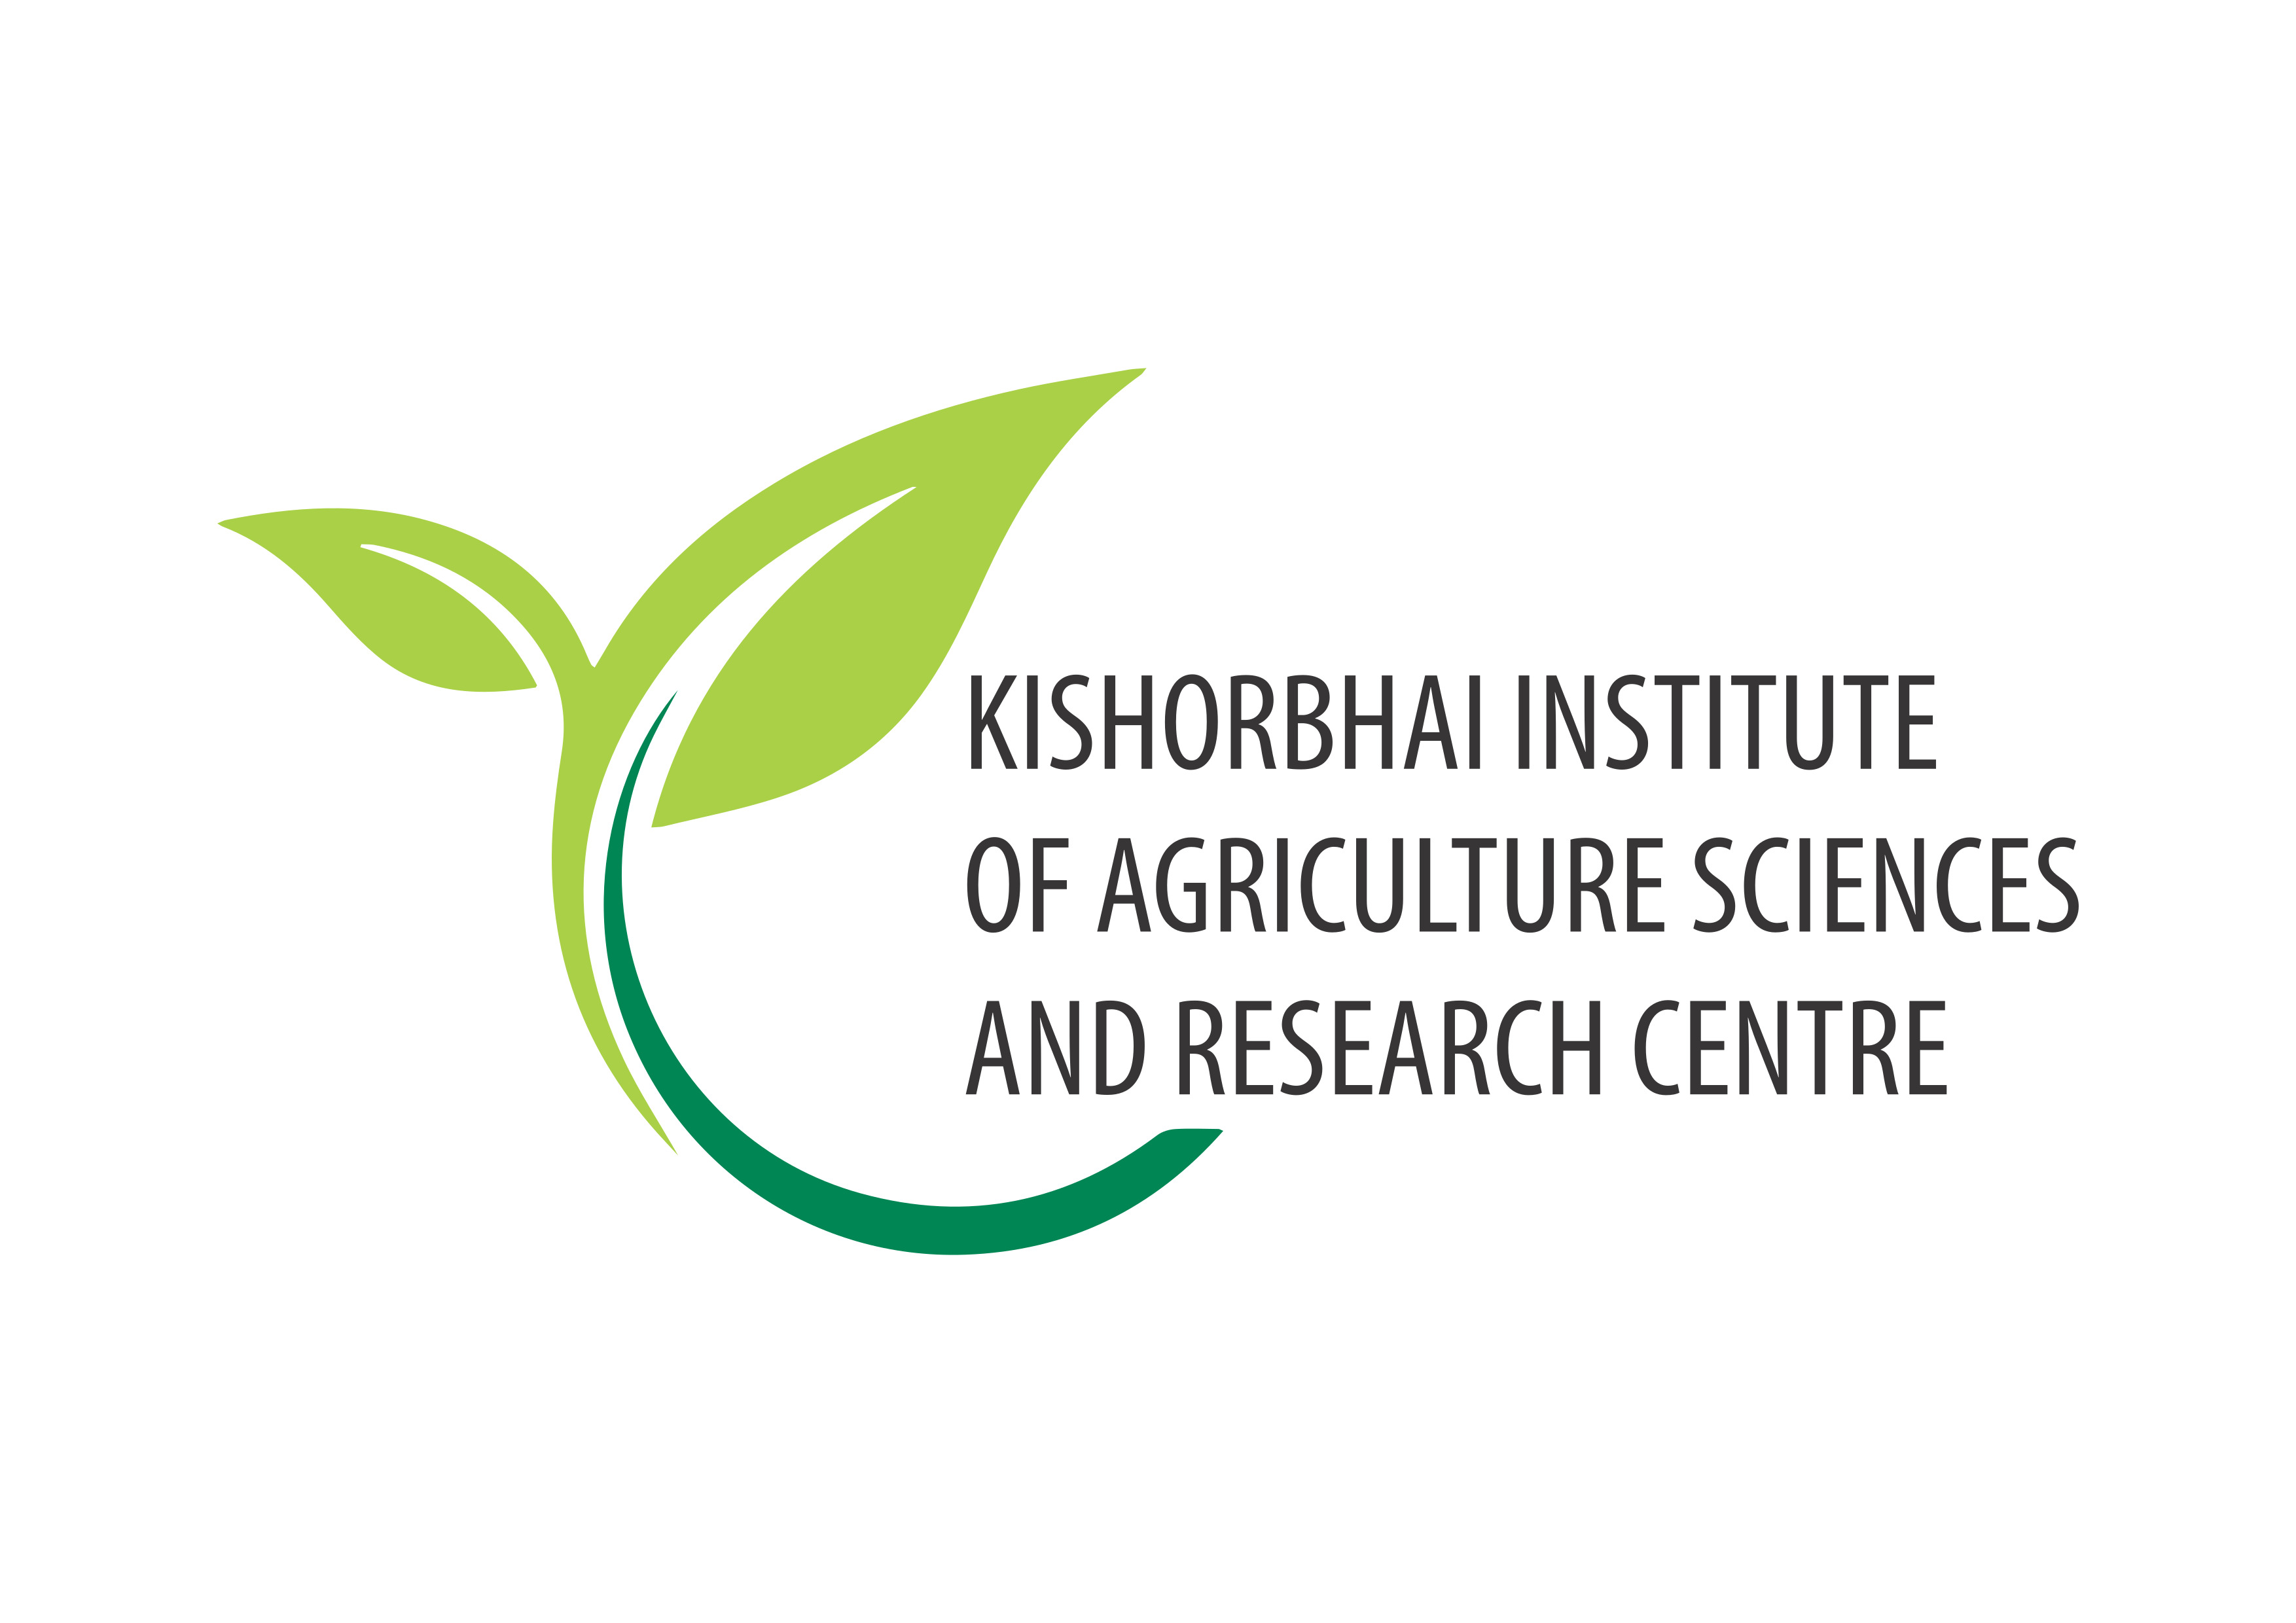 Kishorbhai Institute of Agricultural Sciences and Research Center (KIASRC), Bardoli